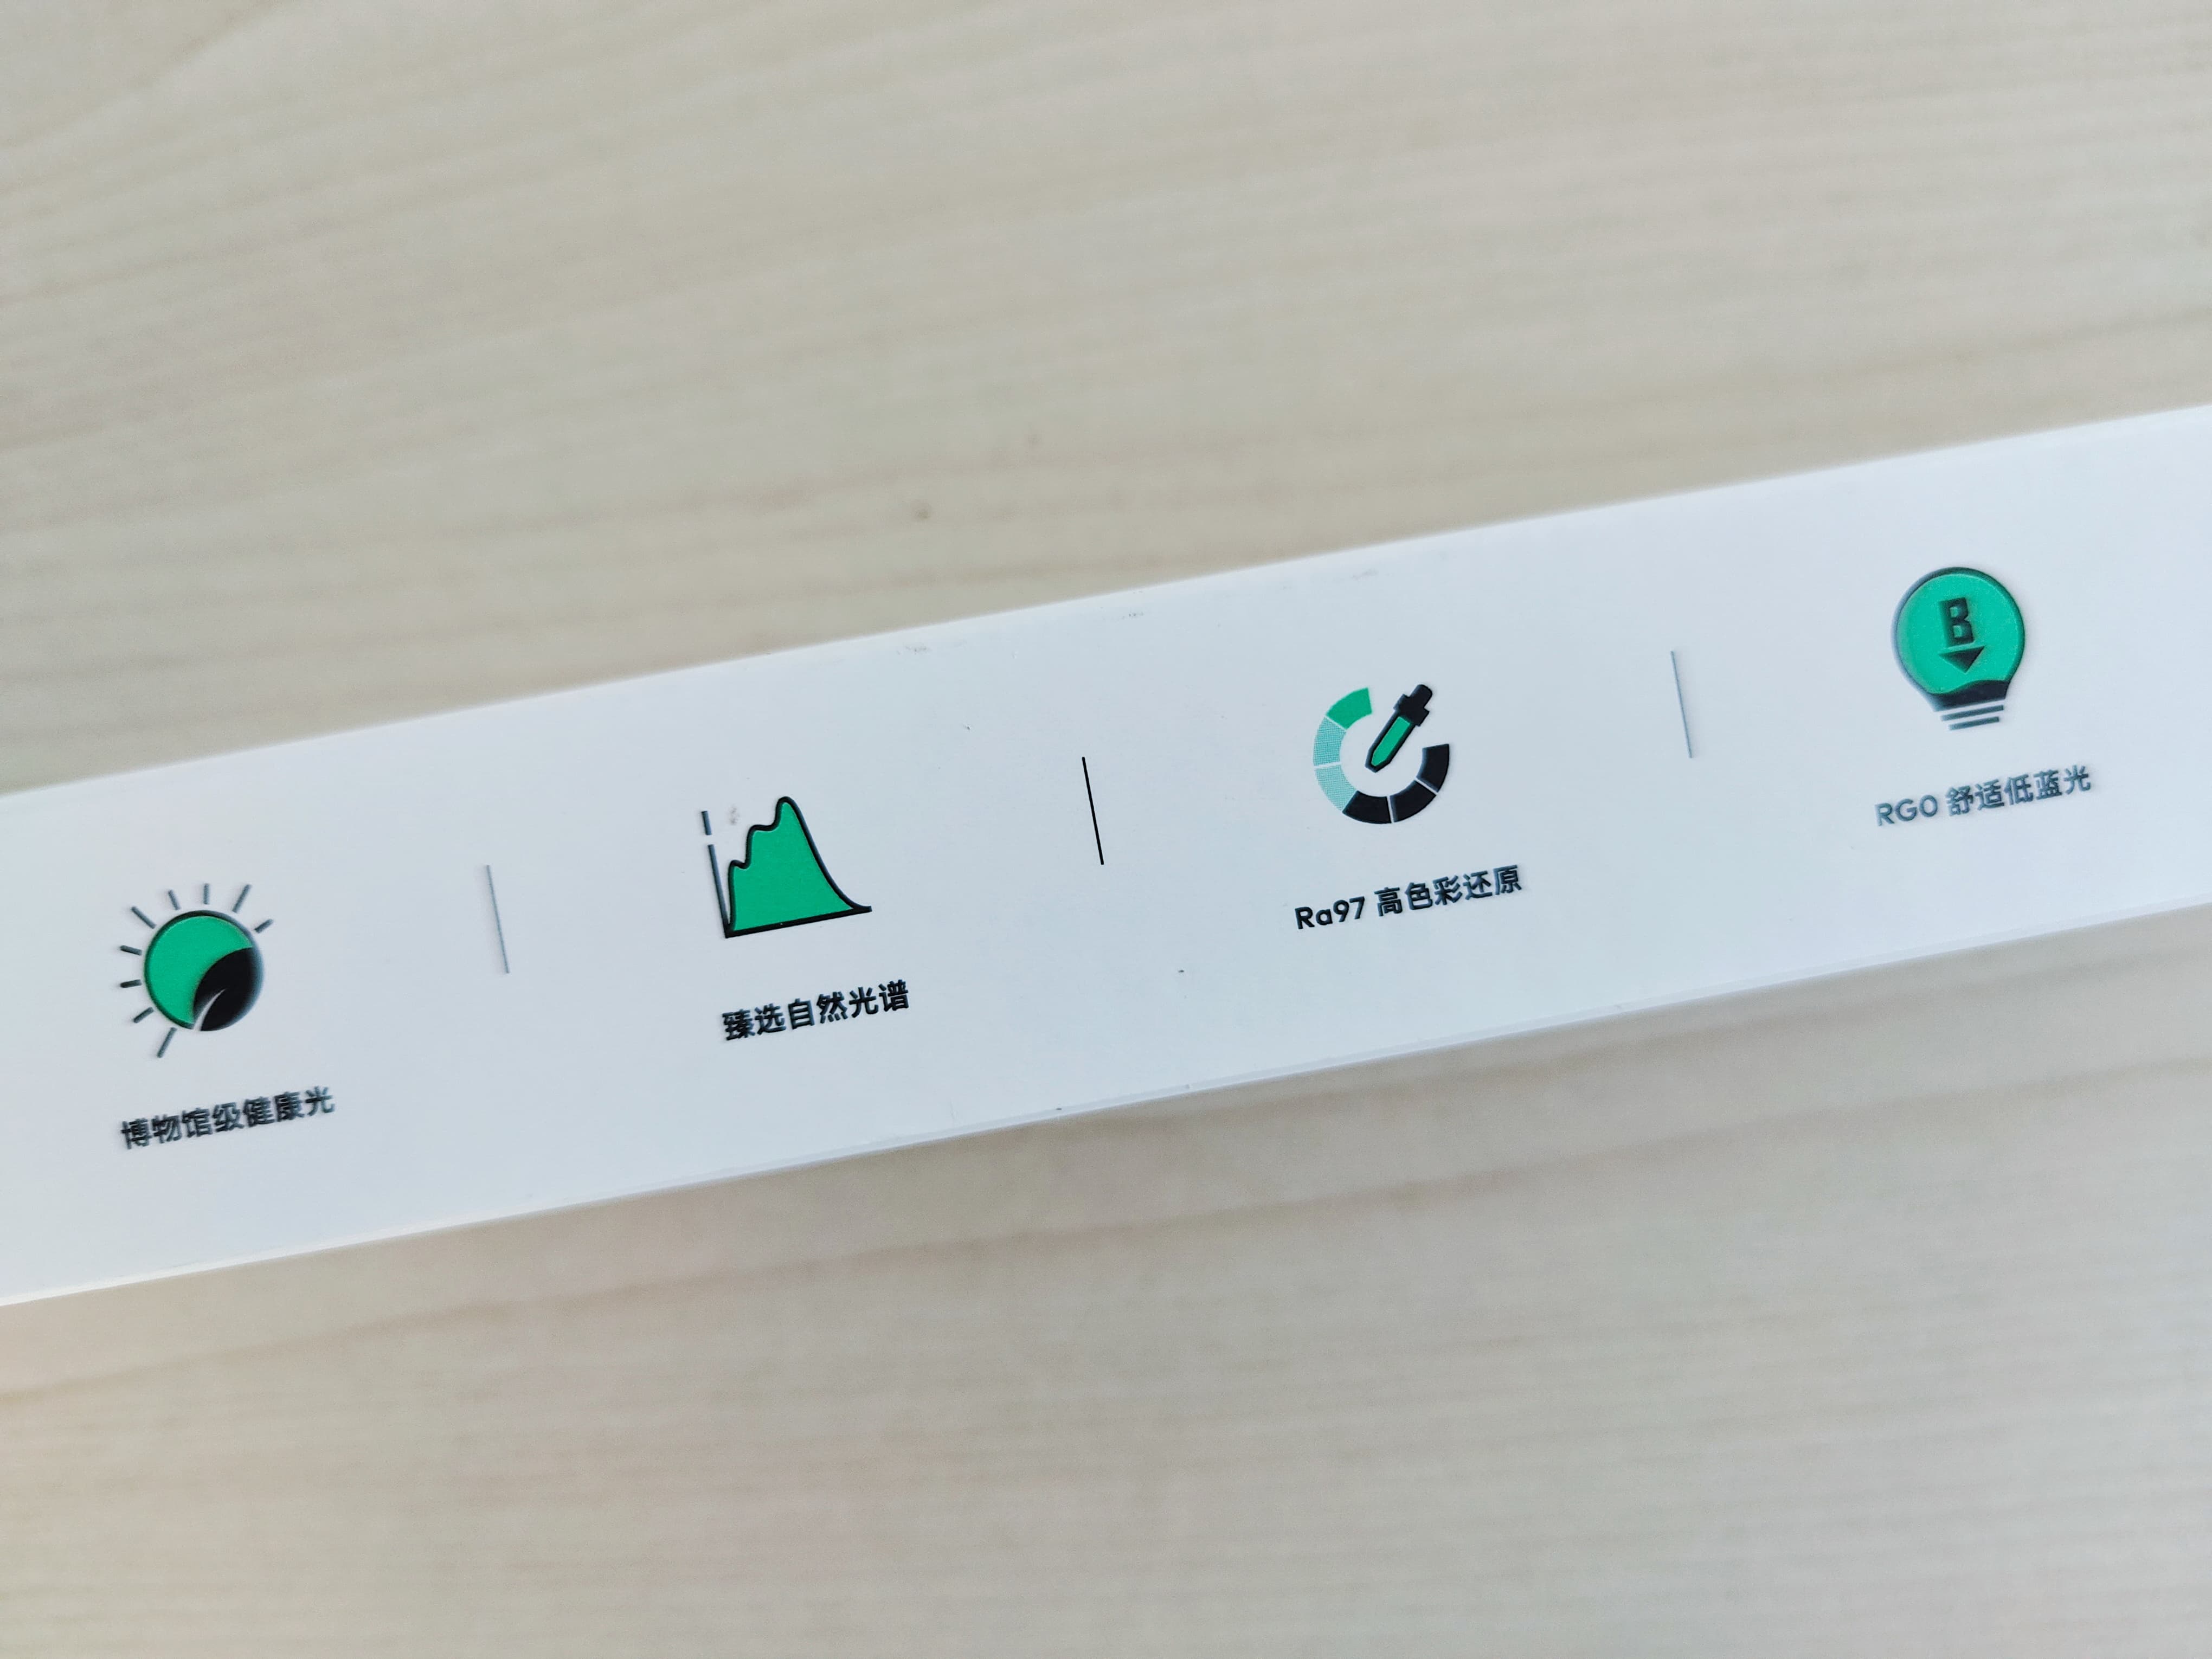 Is Meizu's Lipro smart home a new track or a trick played by Huangzhang's decoration?